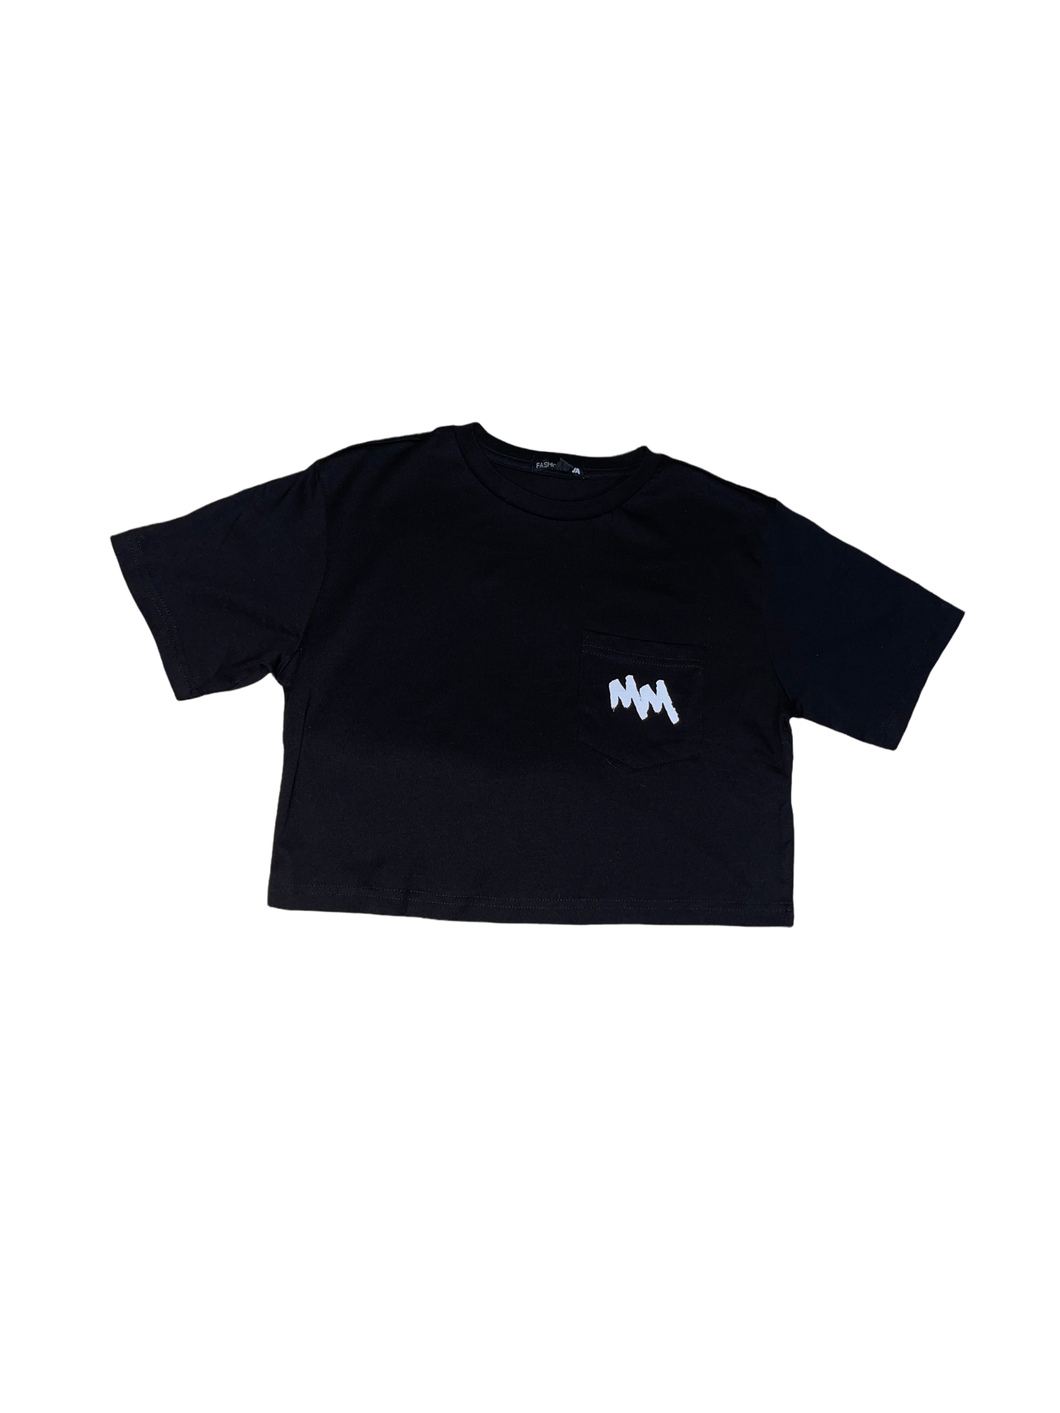 MM | Relaxed Crop Tee | Black